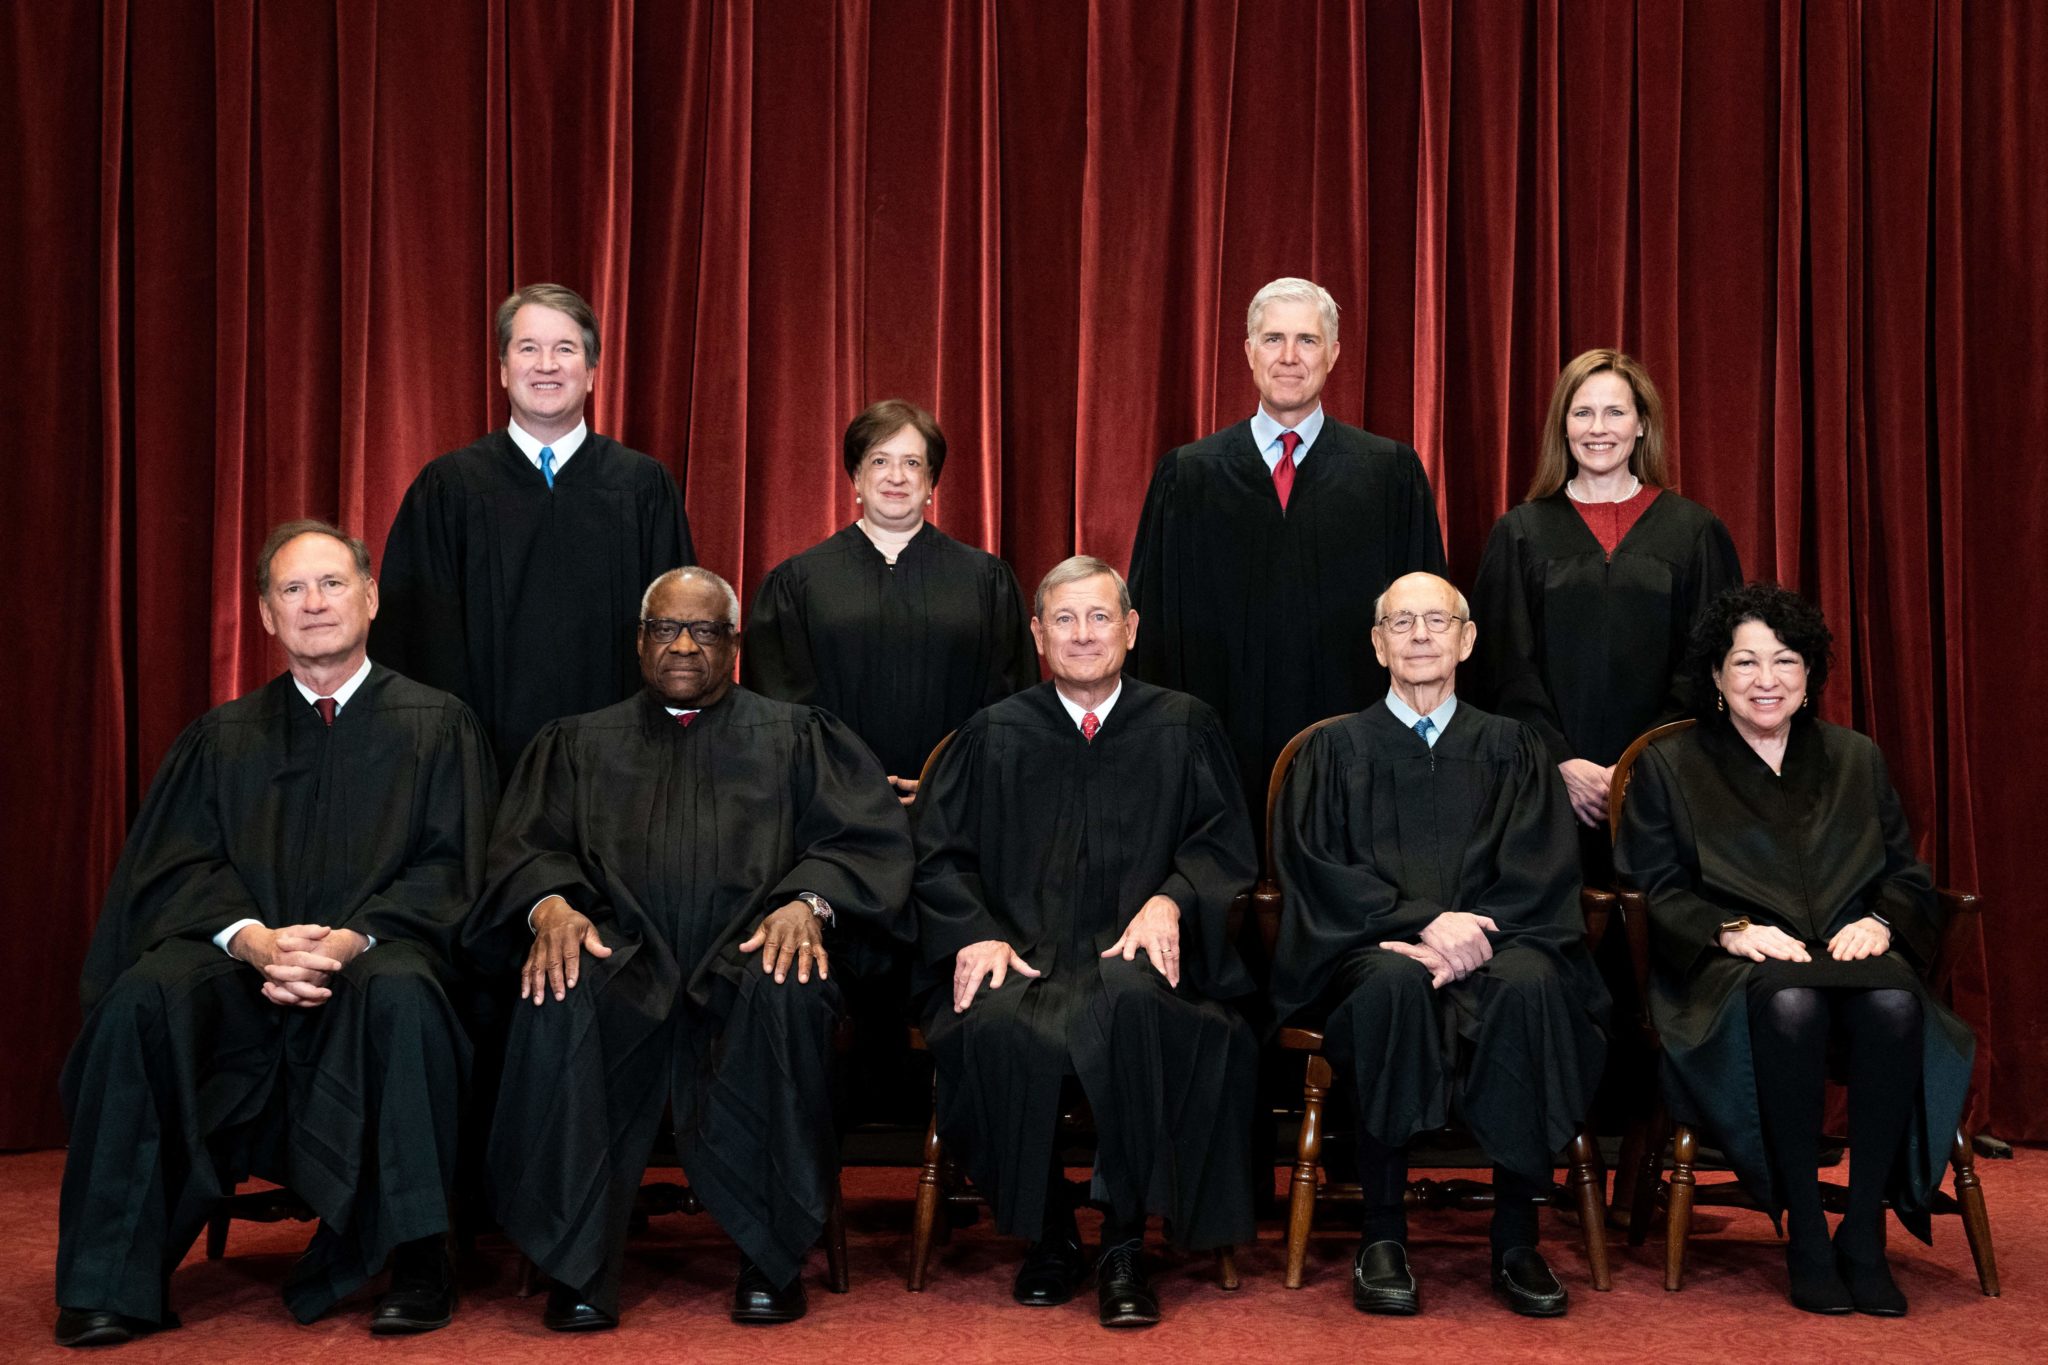 Supreme Court Justice Stephen Breyer Weighs In On His Potential